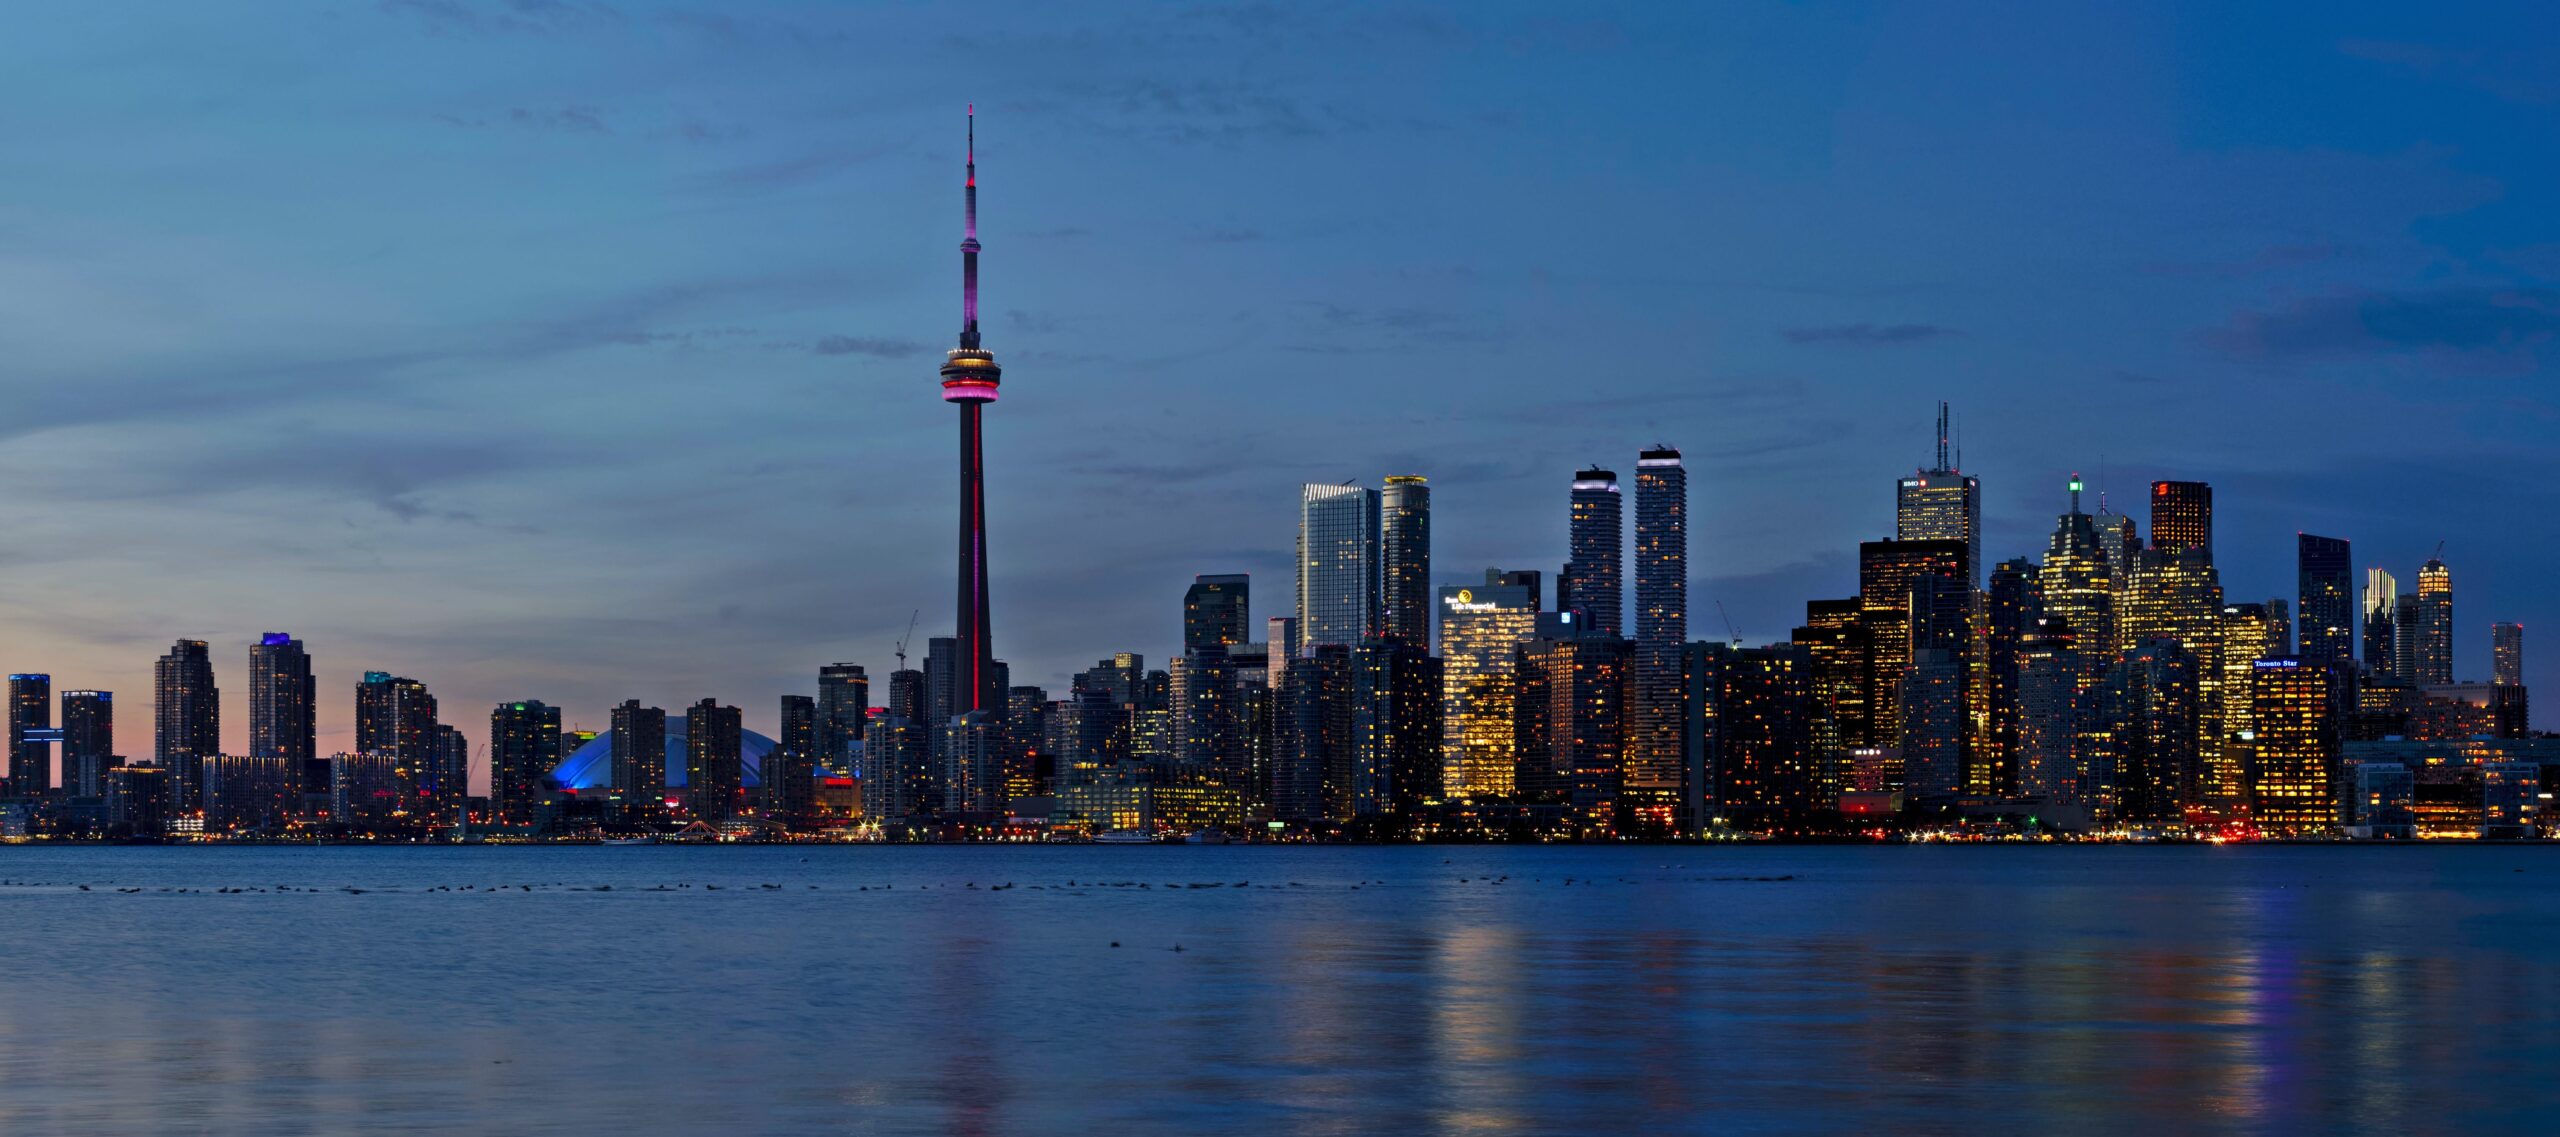 High-res panorama of the Toronto skyline taken from the Toronto Islands